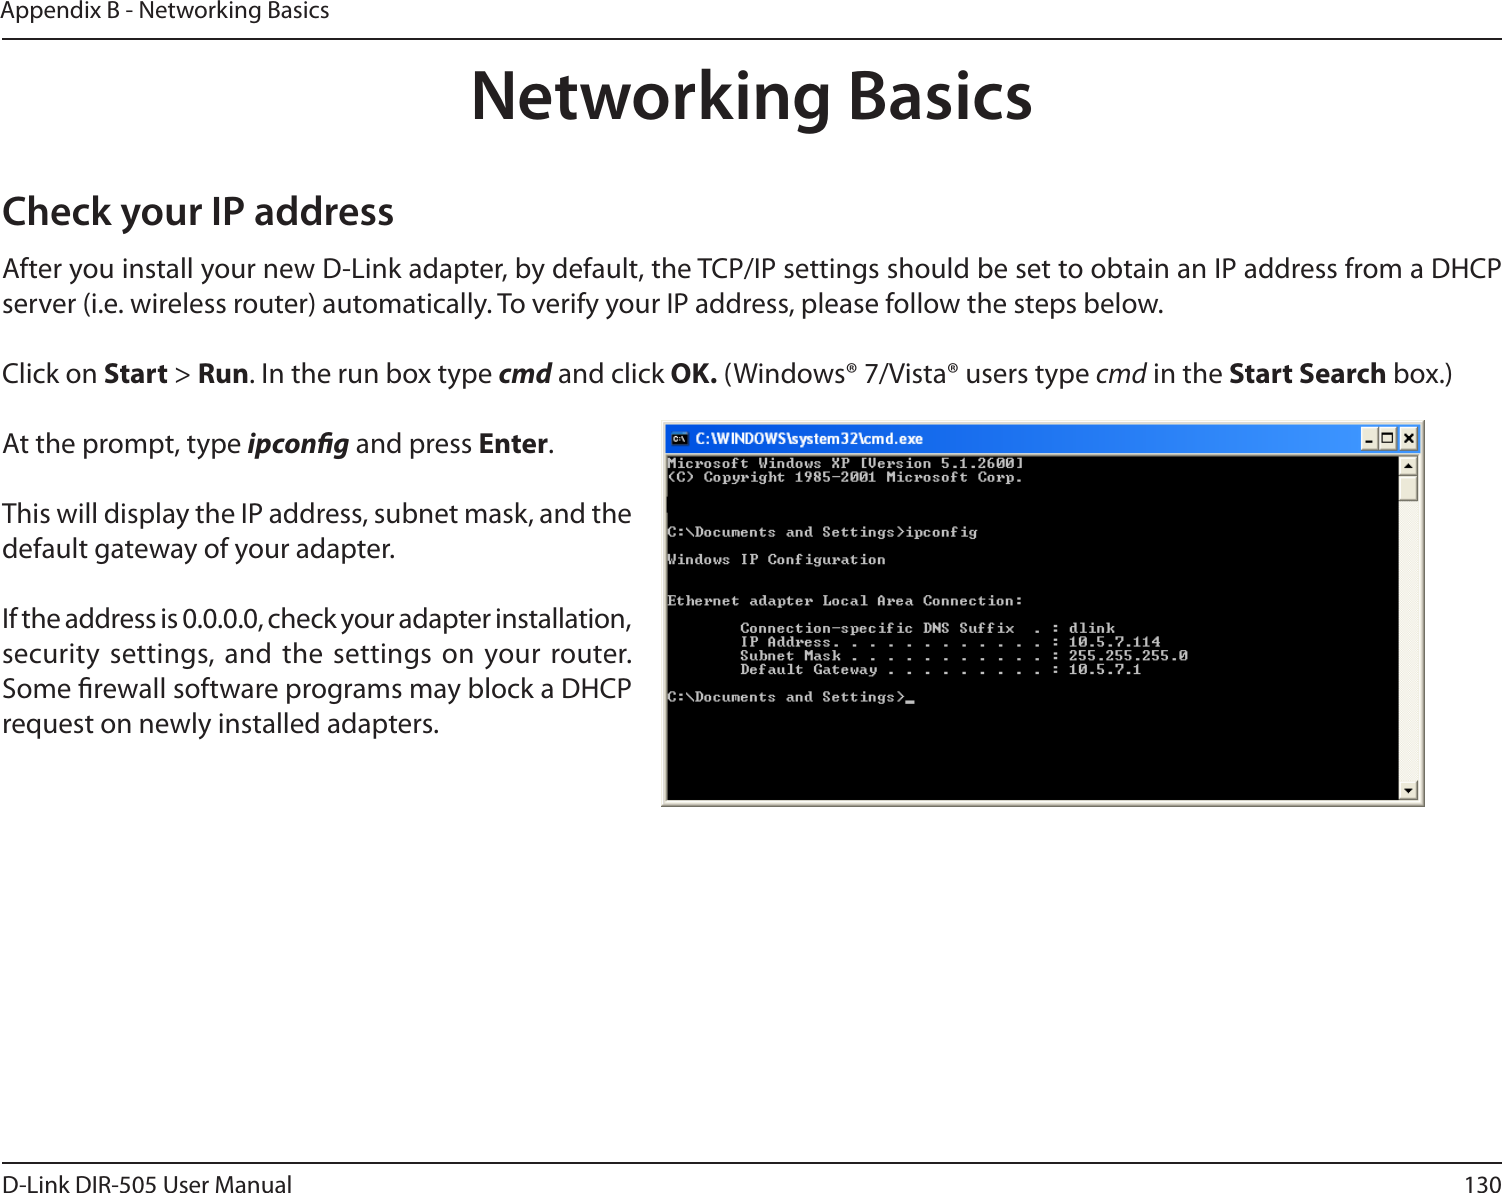 130D-Link DIR-505 User ManualAppendix B - Networking BasicsNetworking BasicsCheck your IP addressAfter you install your new D-Link adapter, by default, the TCP/IP settings should be set to obtain an IP address from a DHCP server (i.e. wireless router) automatically. To verify your IP address, please follow the steps below.Click on Start &gt; Run. In the run box type cmd and click OK. (Windows® 7/Vista® users type cmd in the Start Search box.)At the prompt, type ipcong and press Enter.This will display the IP address, subnet mask, and the default gateway of your adapter.If the address is 0.0.0.0, check your adapter installation, security  settings, and  the settings on your router. Some rewall software programs may block a DHCP request on newly installed adapters. 